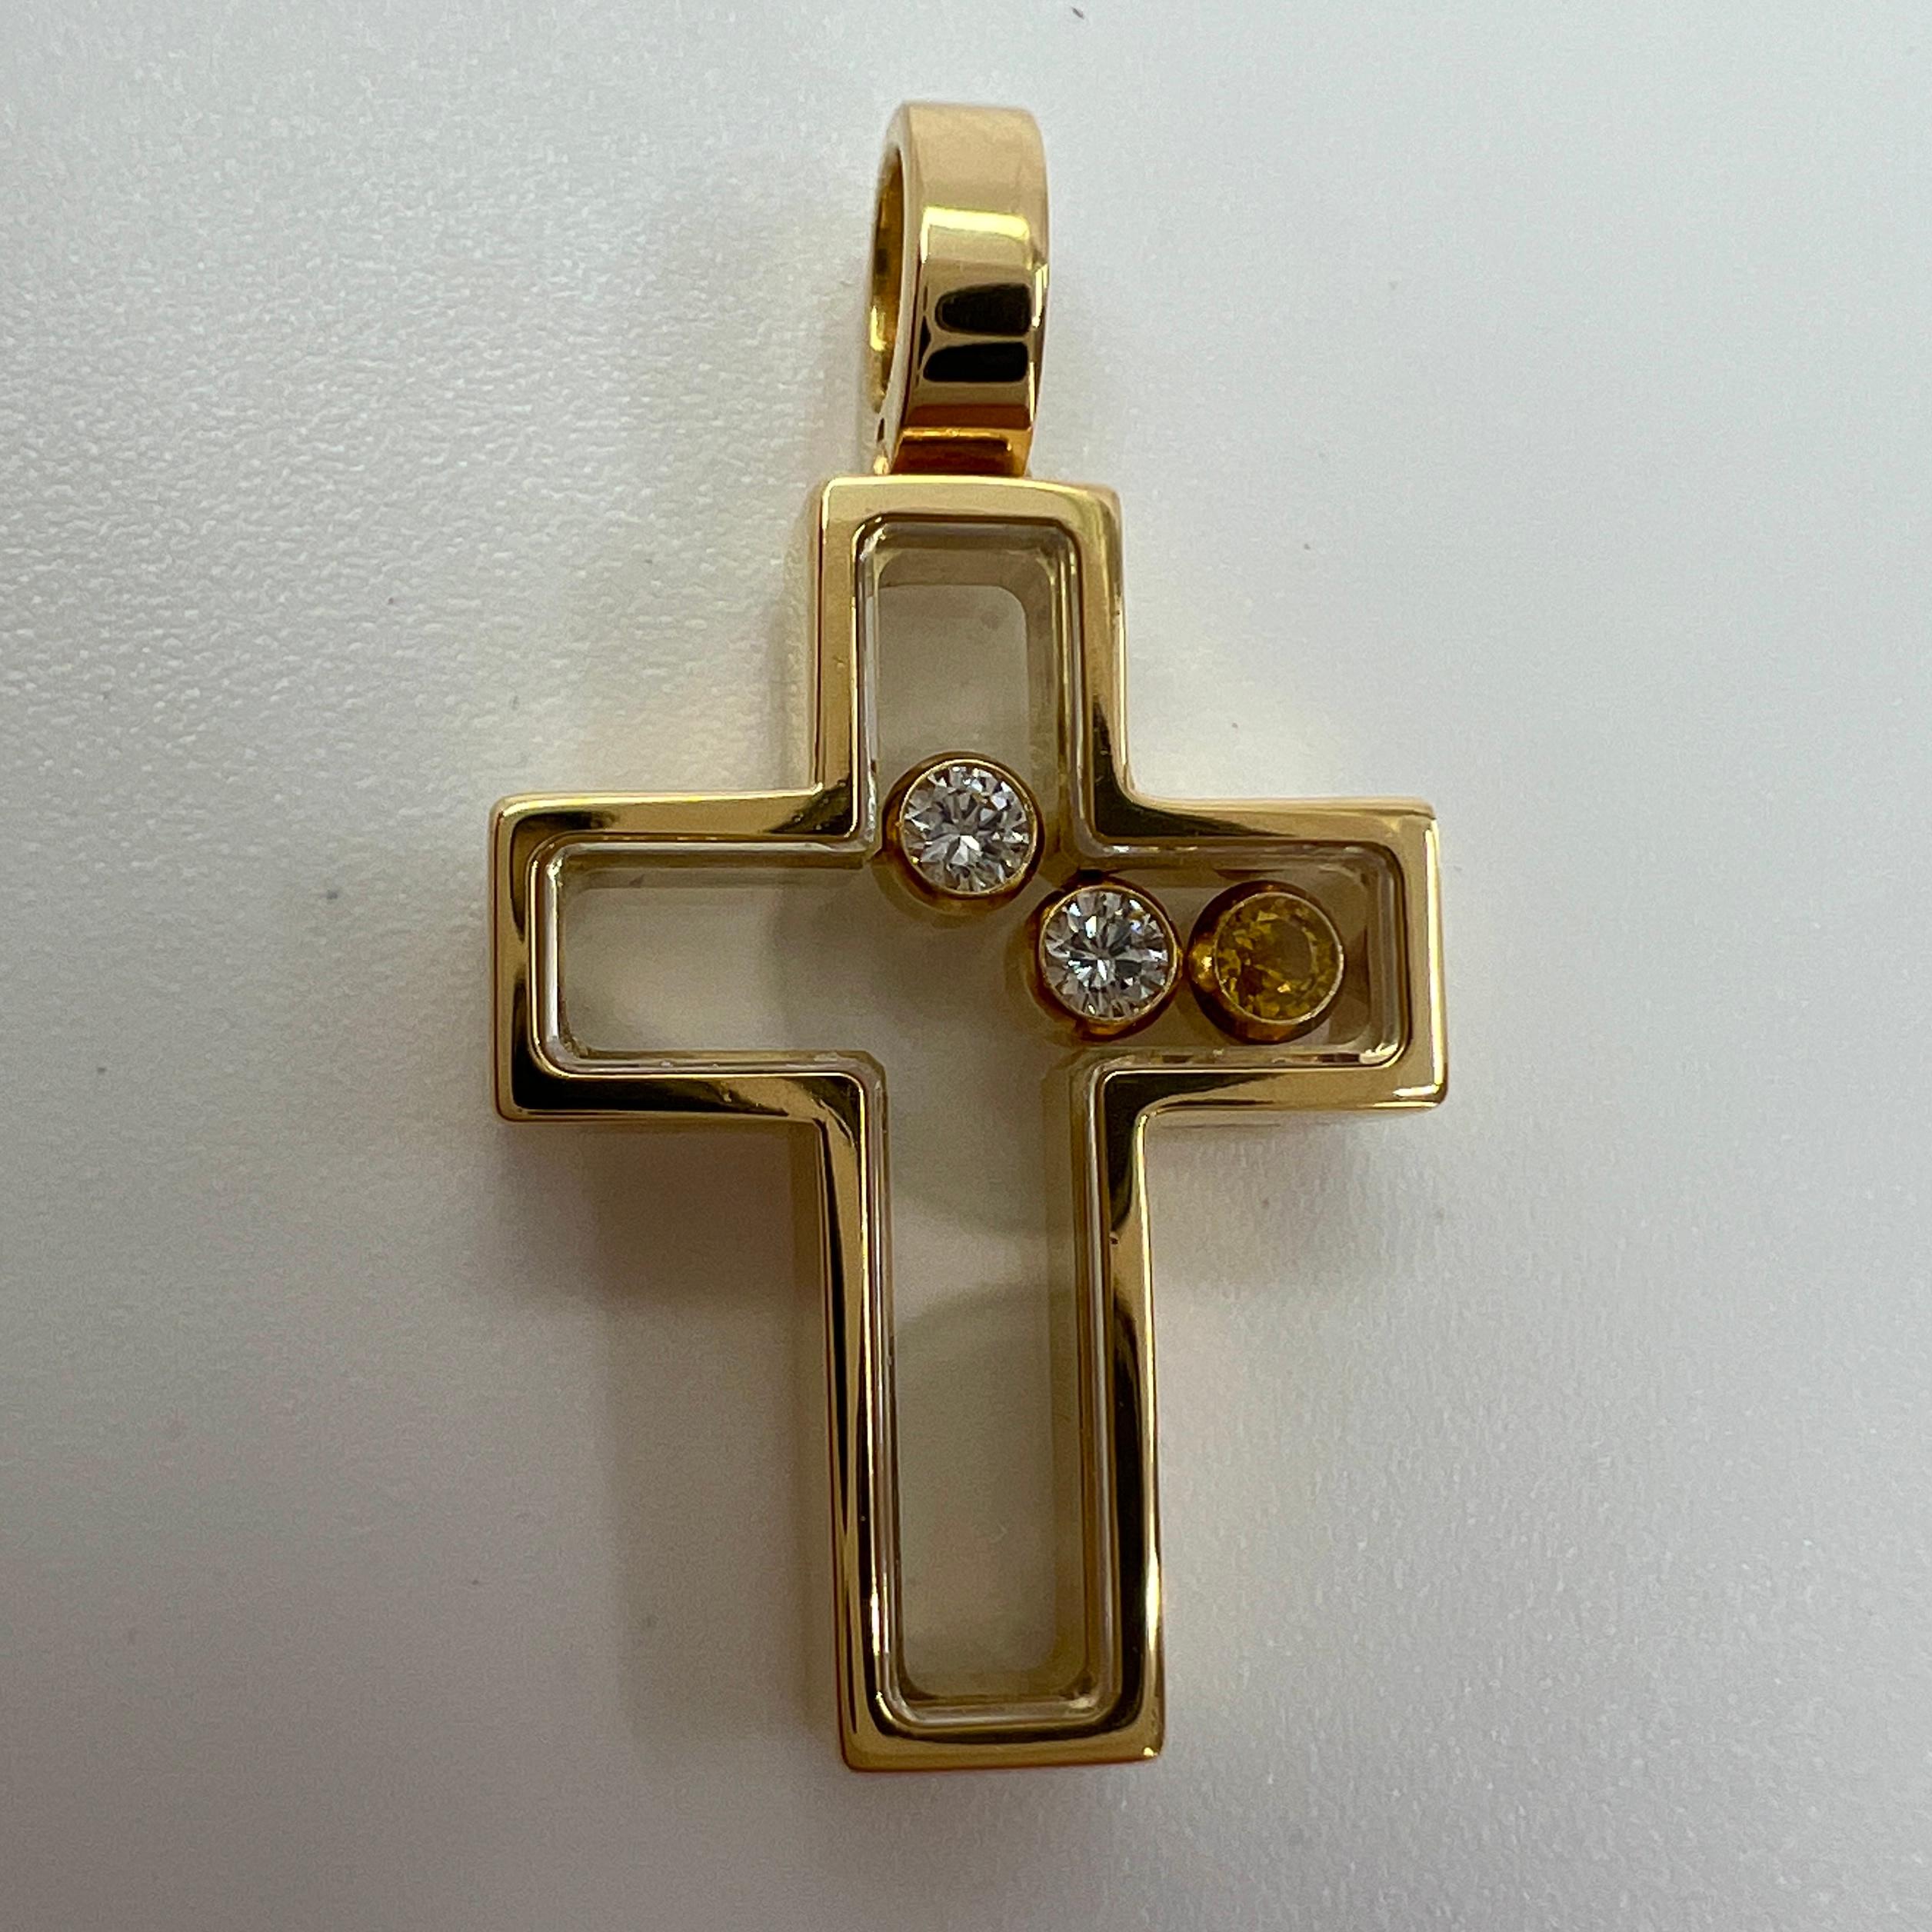 A Rare Chopard Happy Diamonds 18k Yellow Gold Cross Pendant.

Inspired by drops of water, Chopard's Happy Diamonds Icons collection features diamonds that are free to swirl gracefully behind sapphire crystal glass, enhancing their sparkle with every